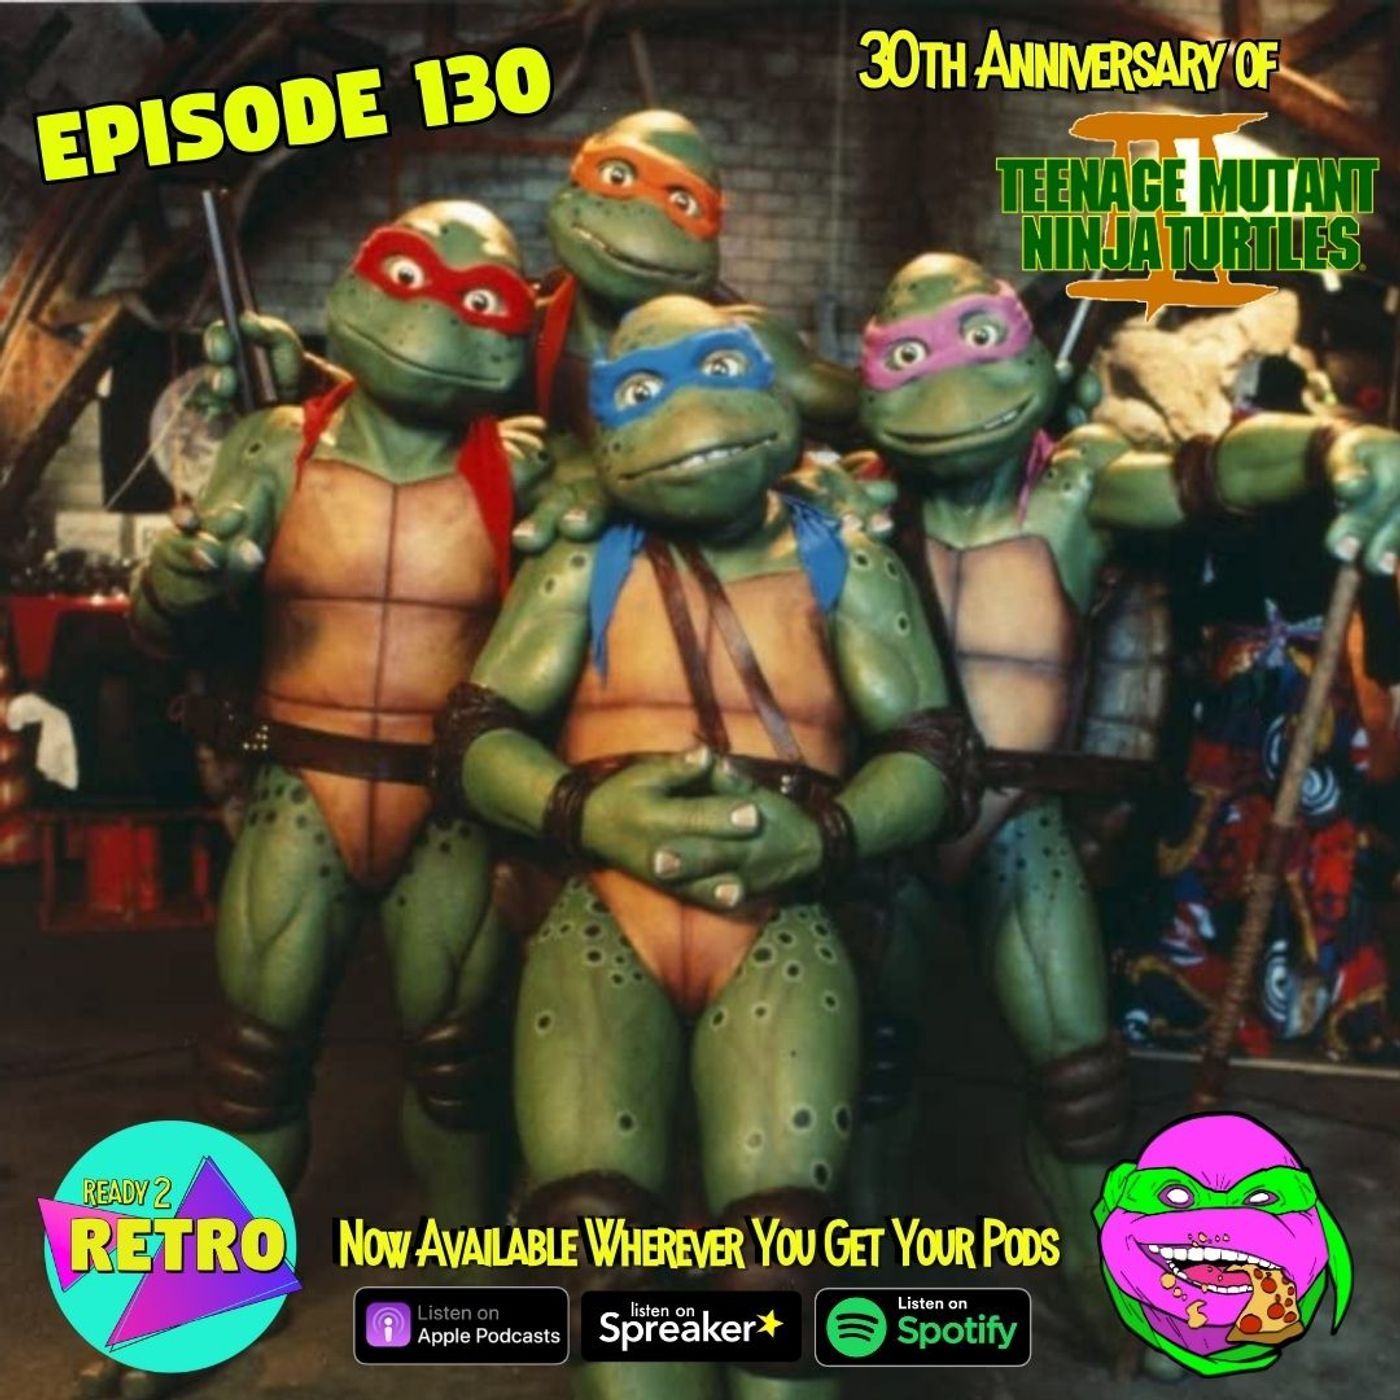 Episode 130: 30th Anniversary of 